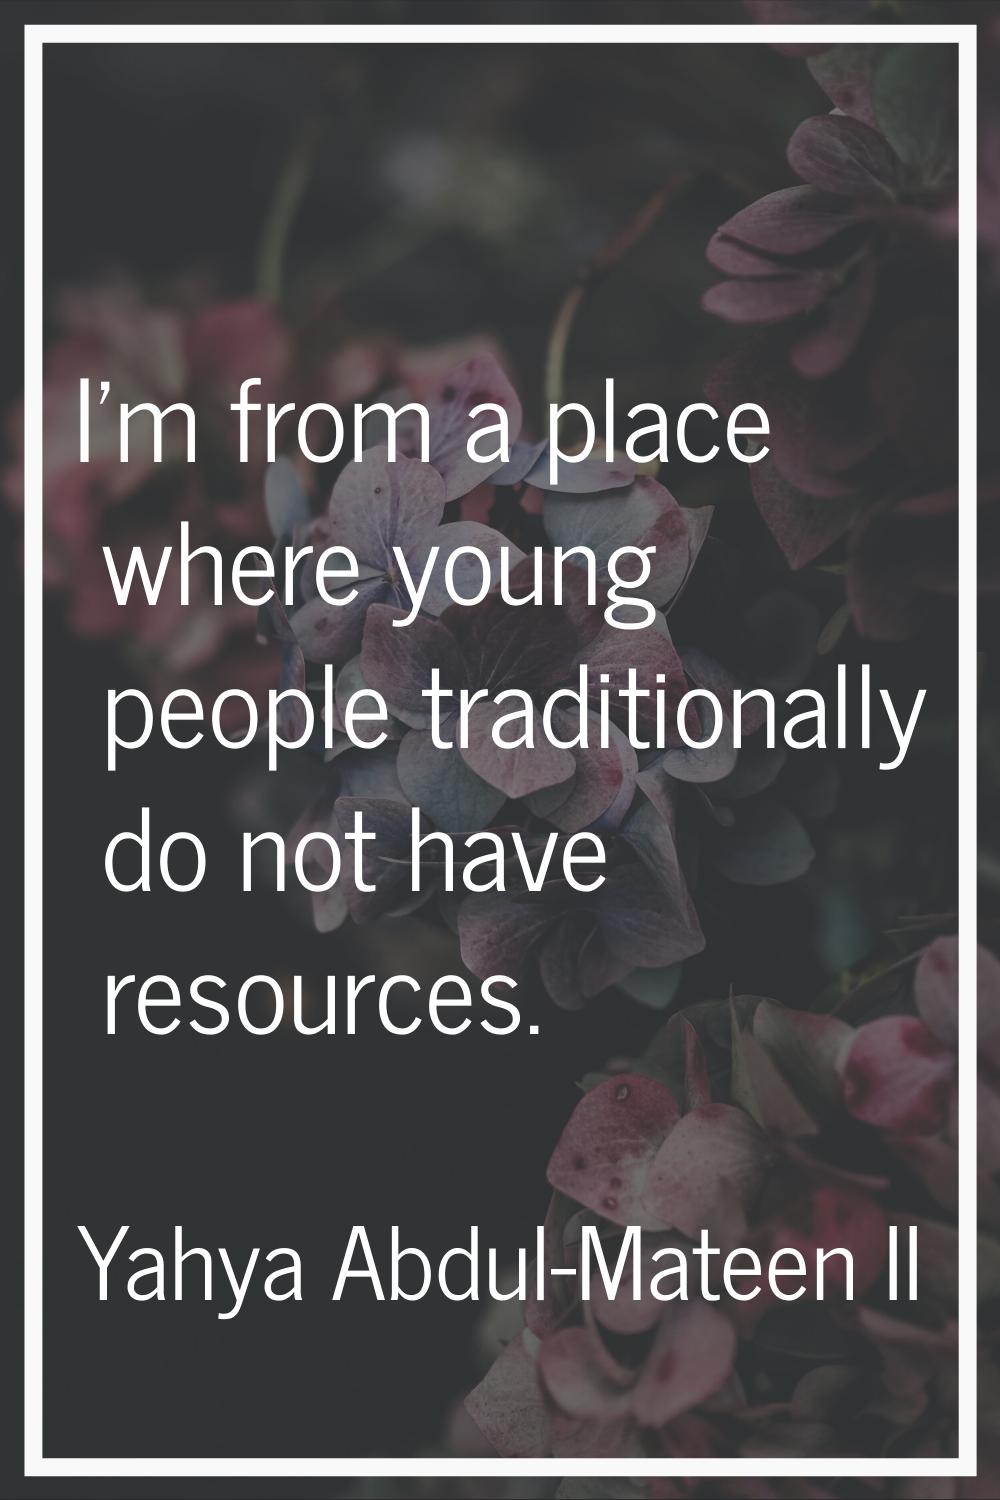 I'm from a place where young people traditionally do not have resources.